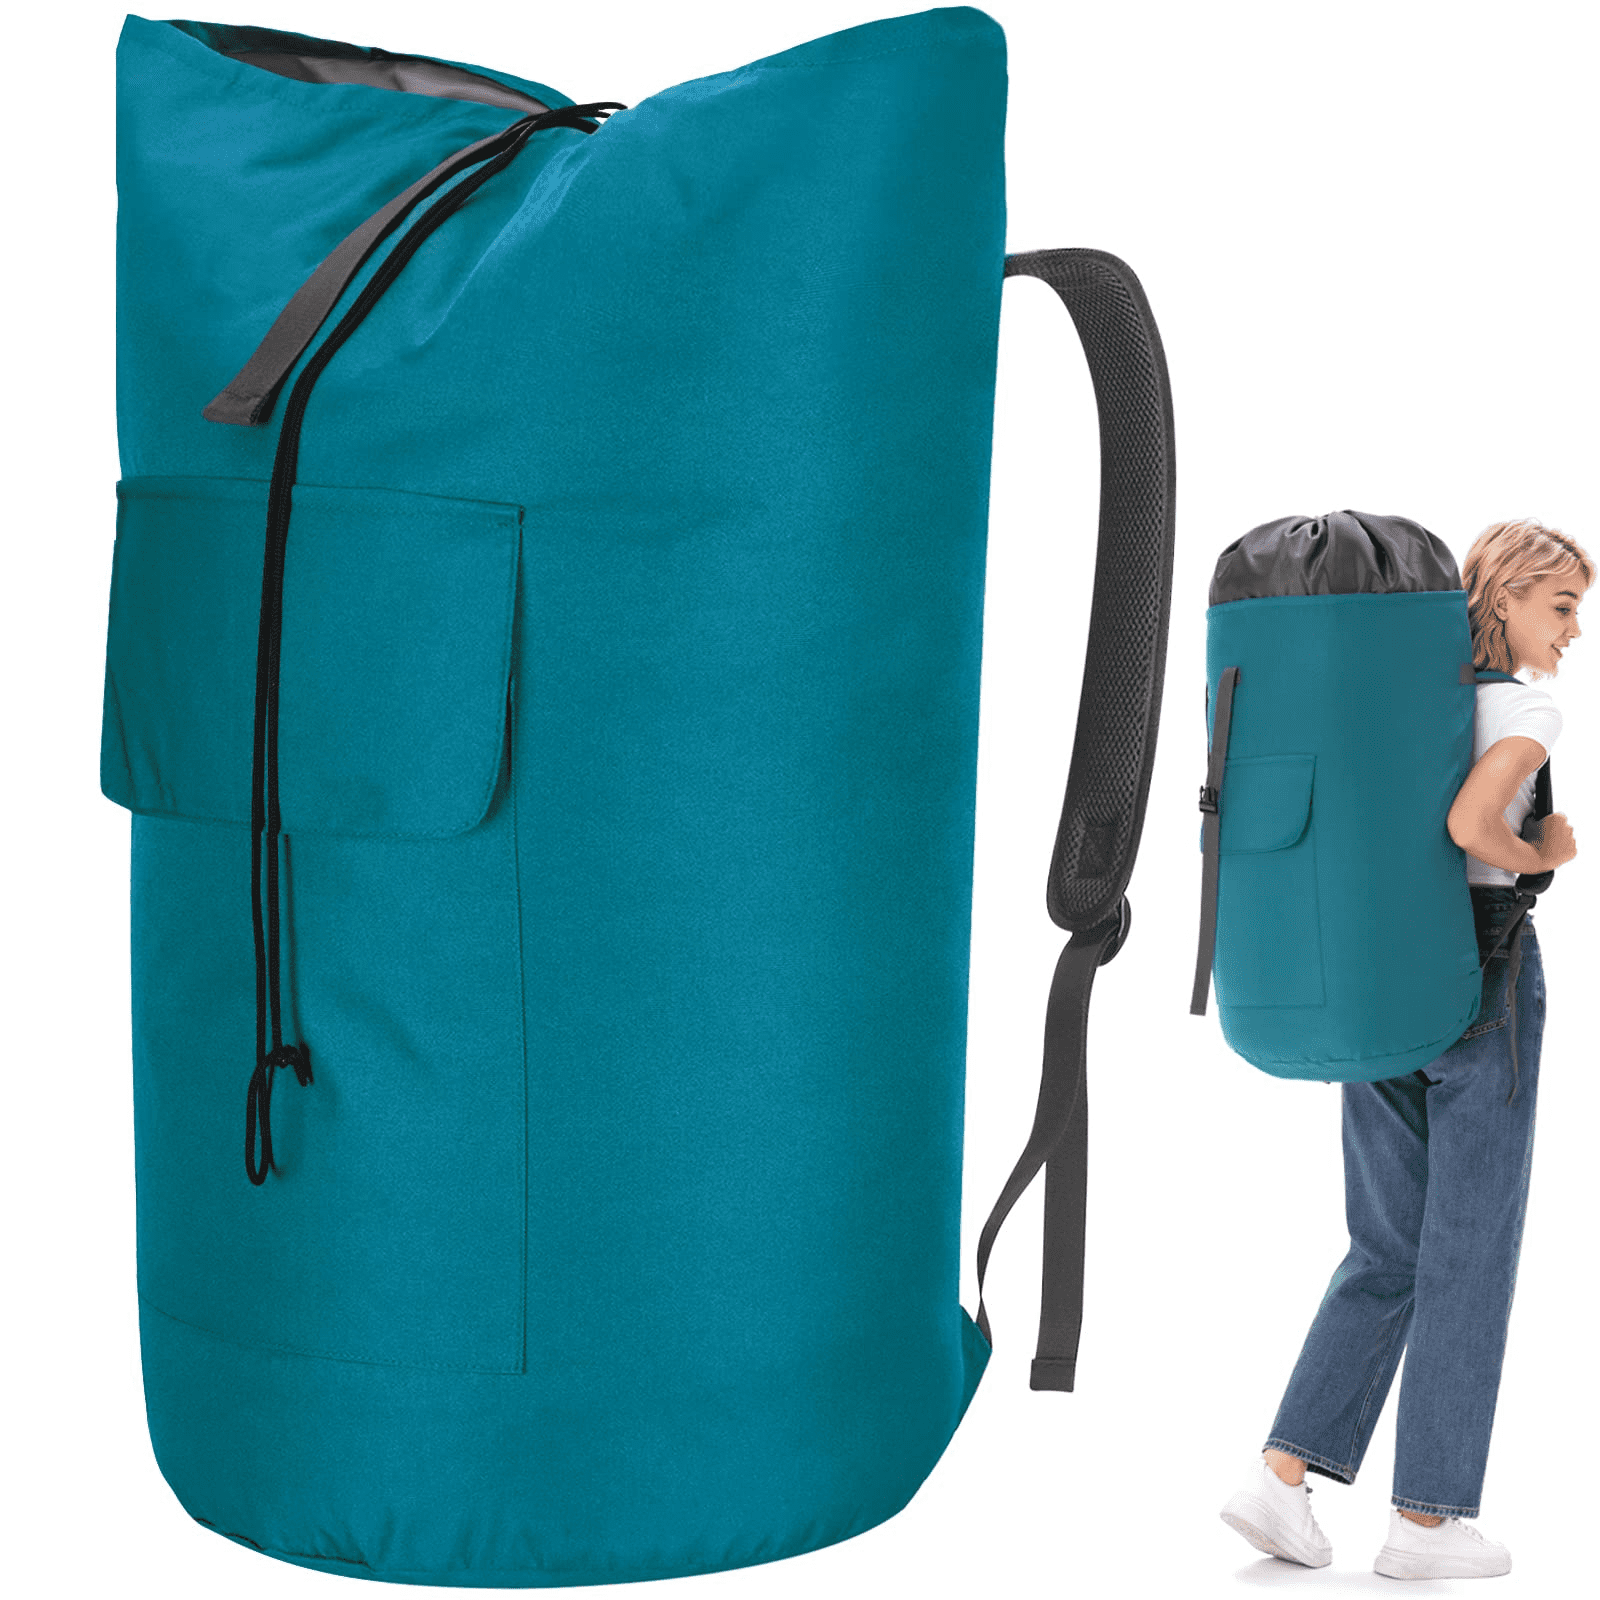 CleverMade Laundry Backpack Duffel Bag Tote with Shoulder Straps - Extra  Large Capacity Clothes Hamp…See more CleverMade Laundry Backpack Duffel Bag